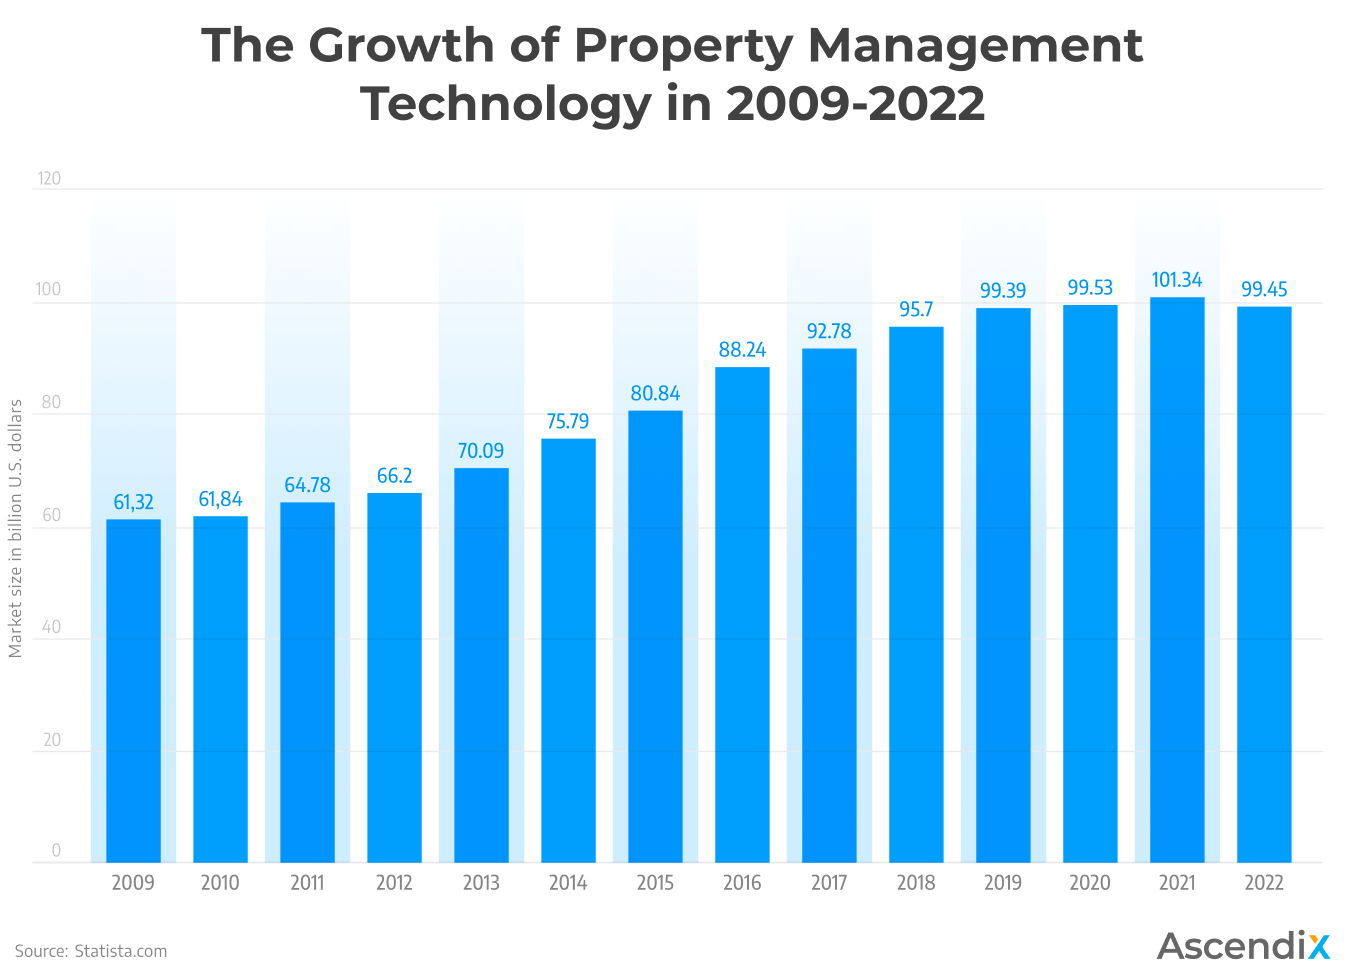 The Growth of Property Management Technology in 2009-2022 